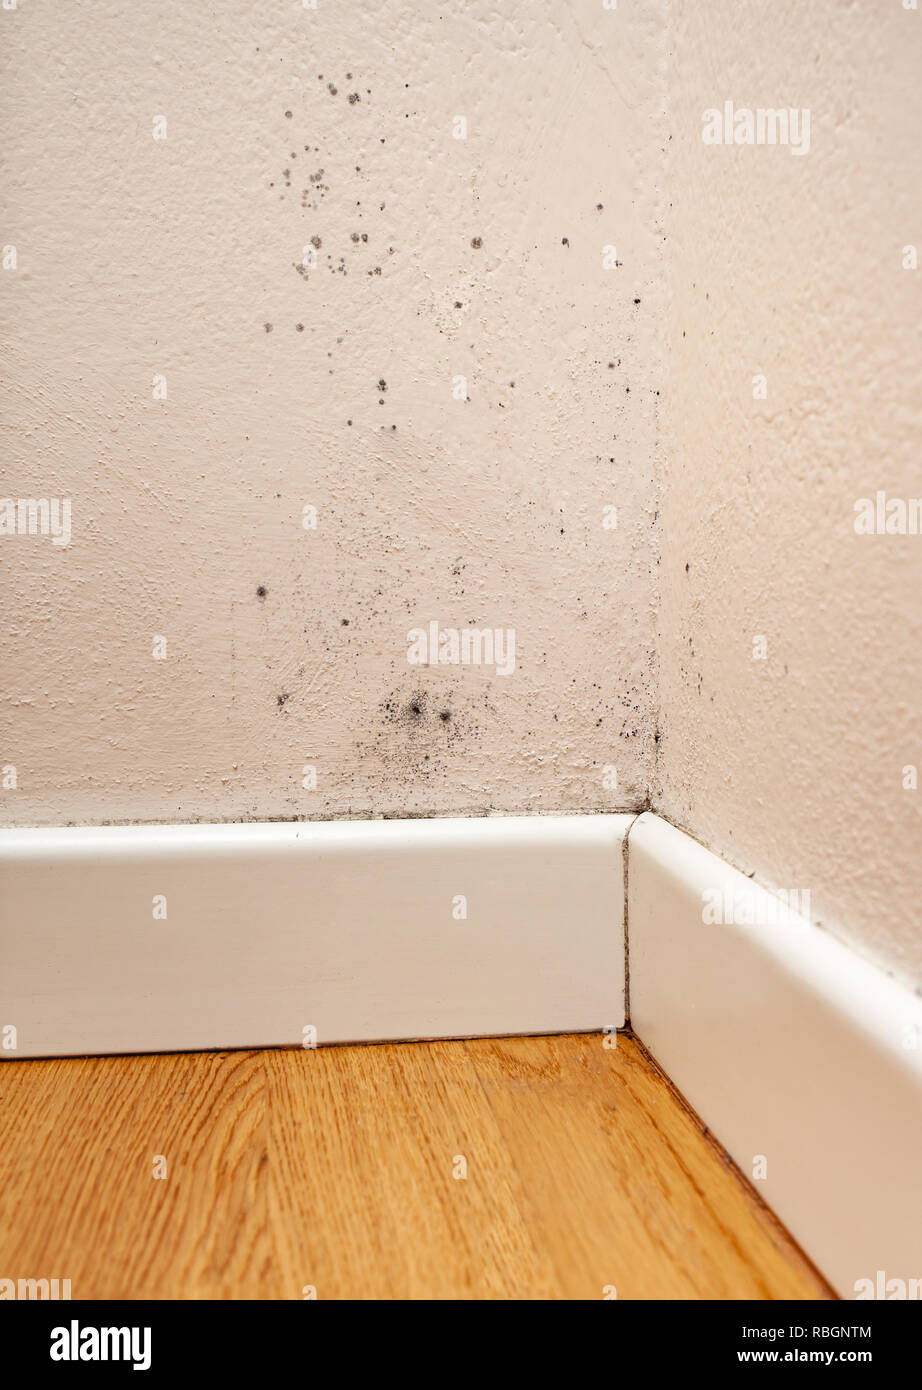 Black Mold In The Corner Of The Walls Stock Photo 230864388 Alamy